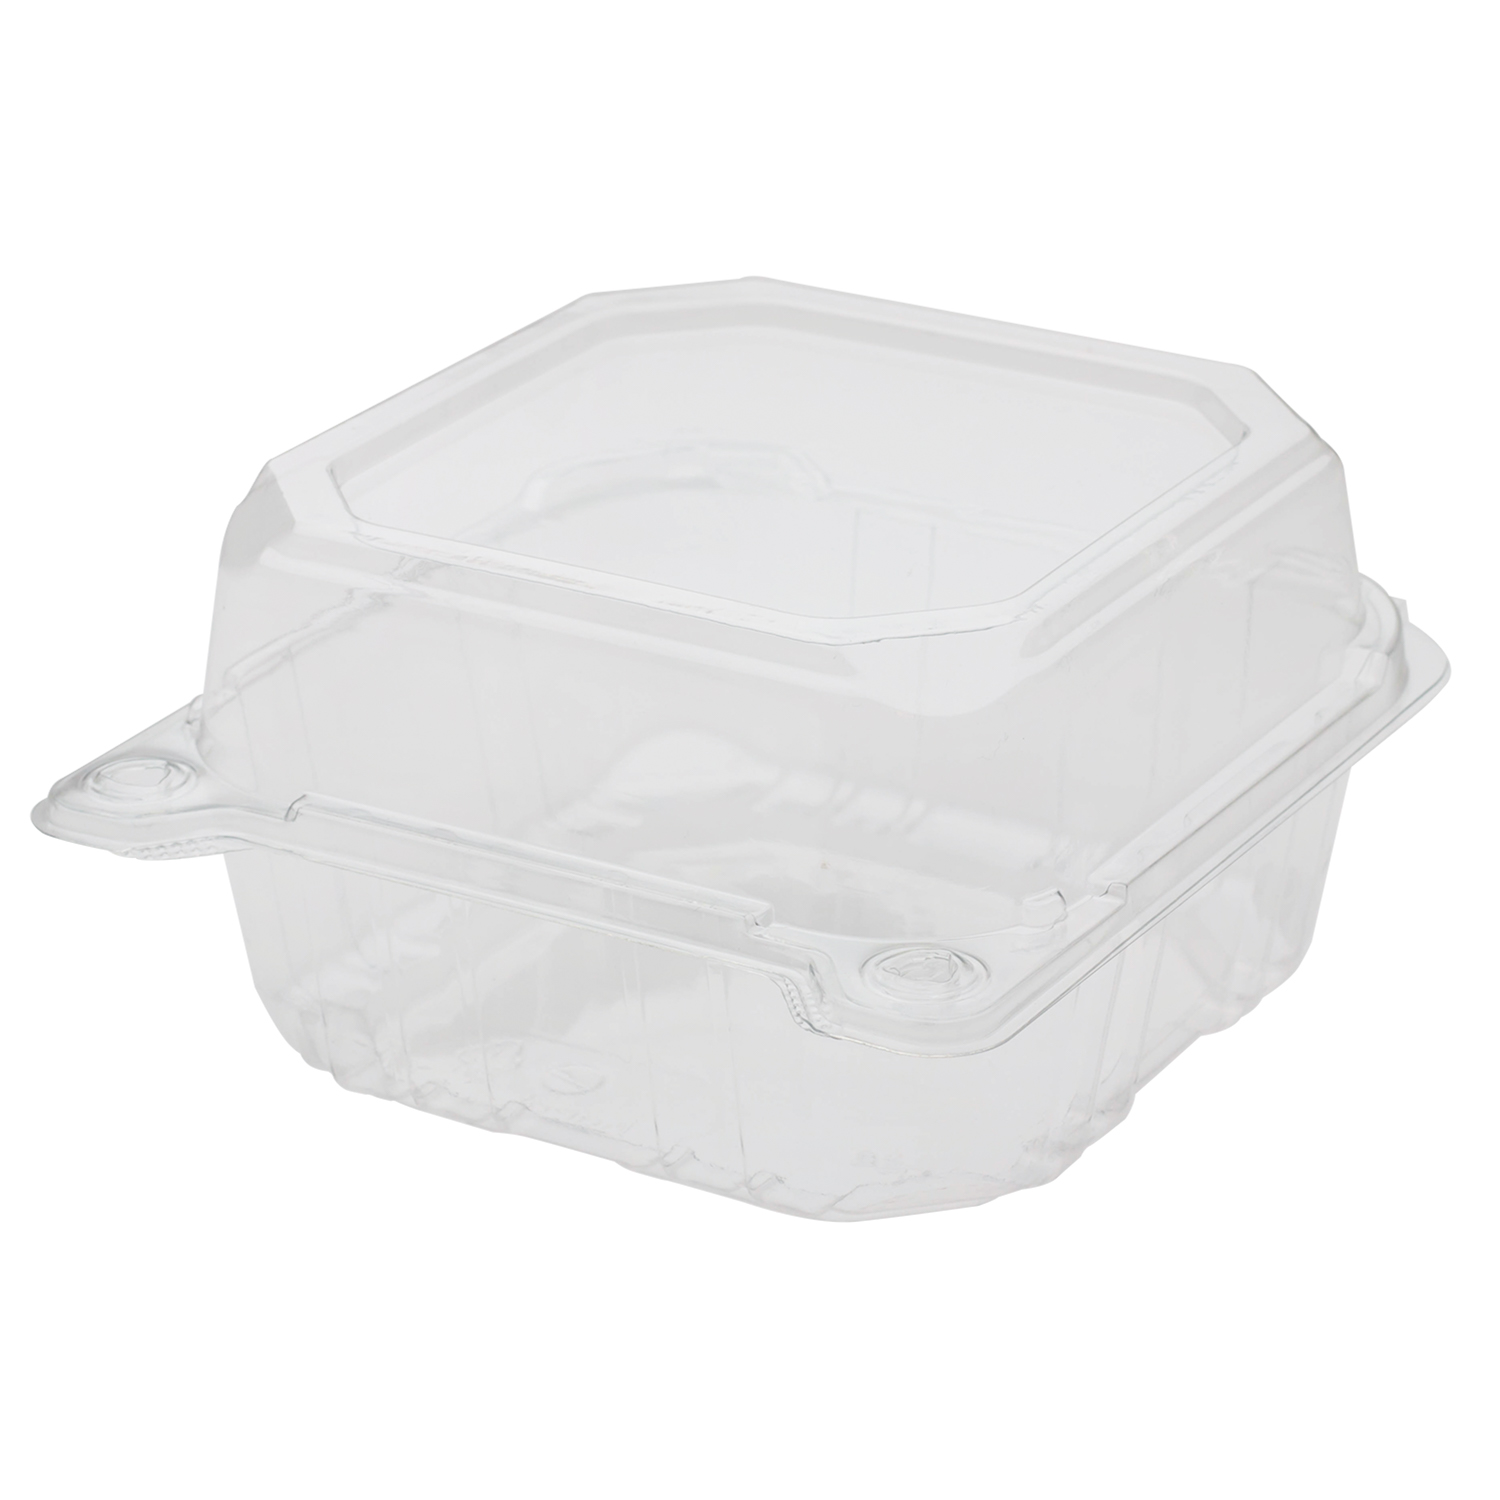 Buy Take Out Boxes Clamshell Hinged Biodegradable To Go Food